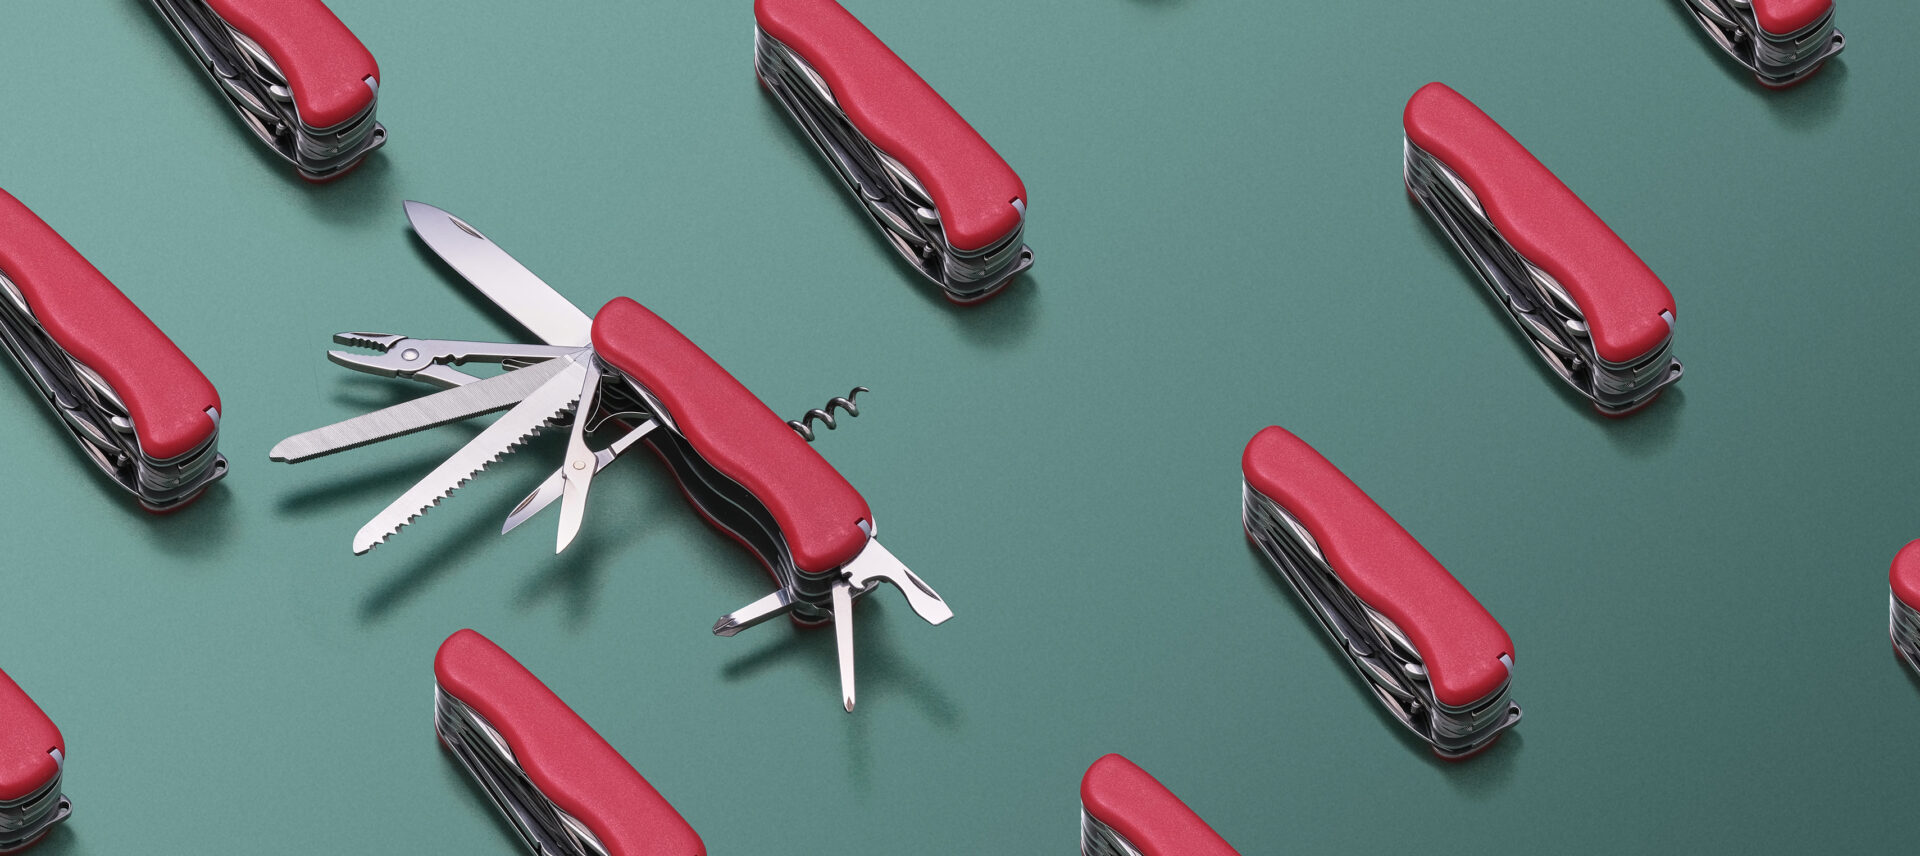 Swiss army knives on a green background